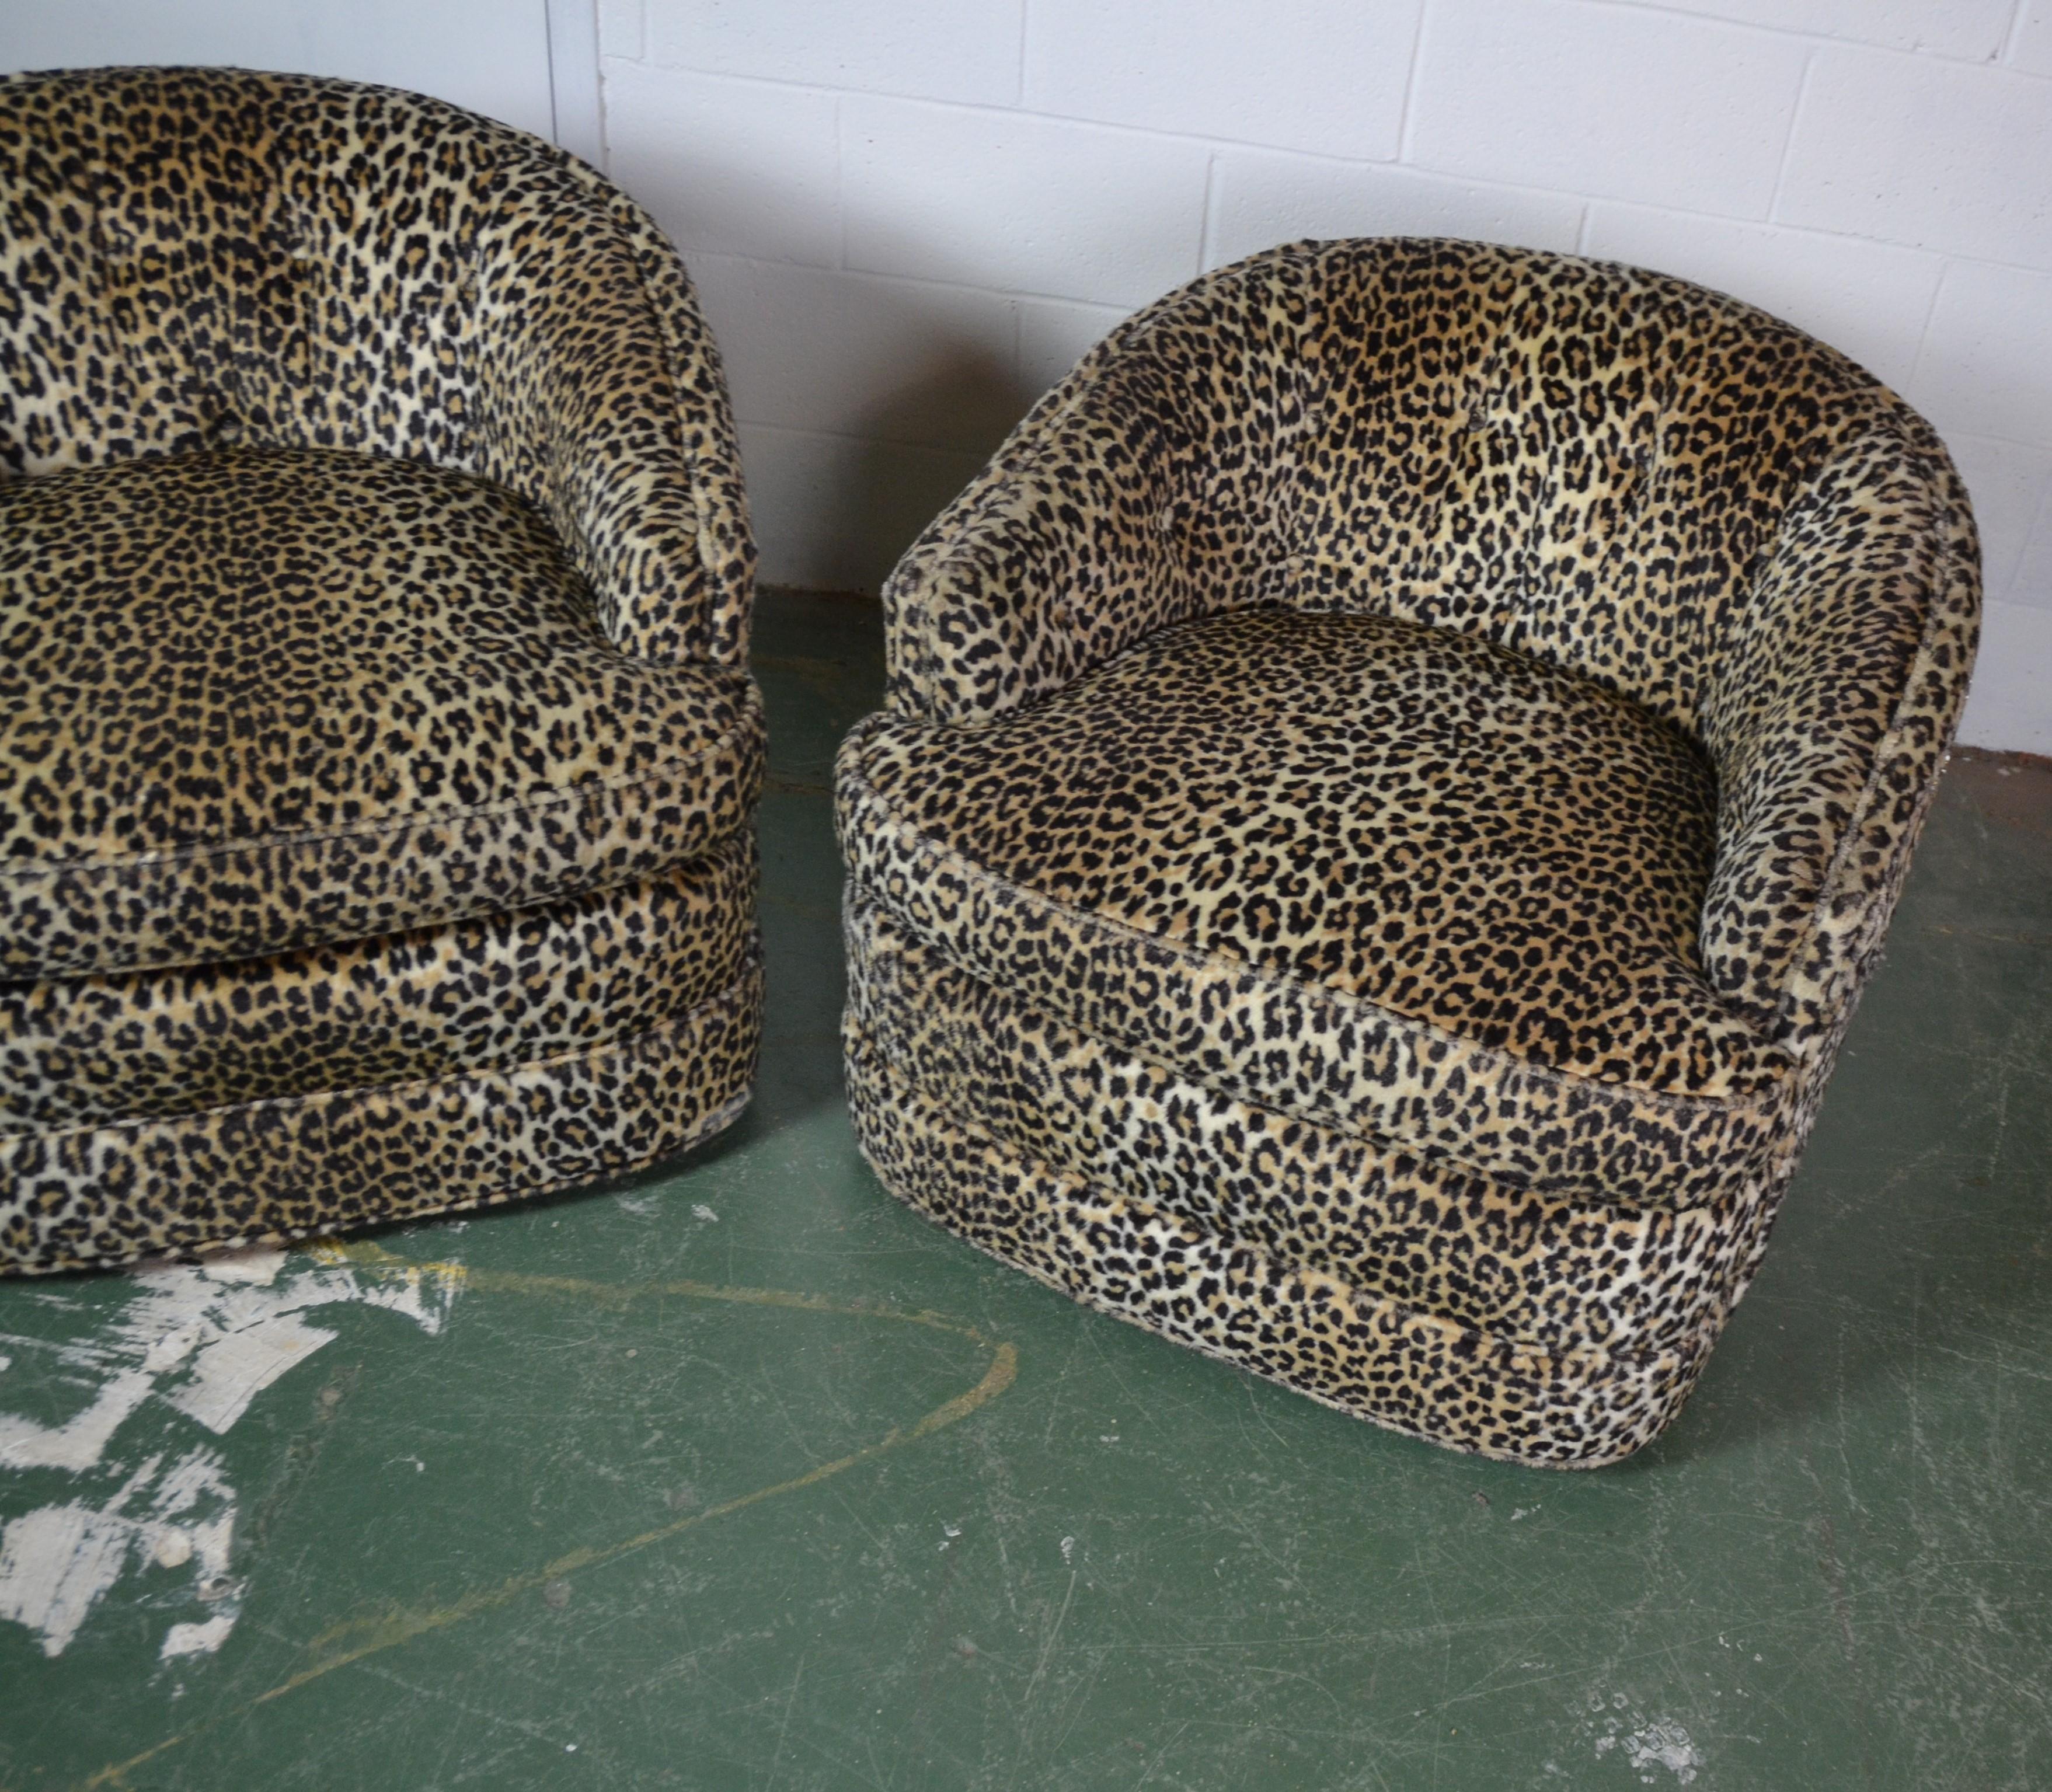 Pair of vintage Henredon Shoonbeck lounge chairs features extremely soft leopard upholstery and removable cushions. The low sitting swivel design with angled armrests provides maximum comfort in any seating arrangement.